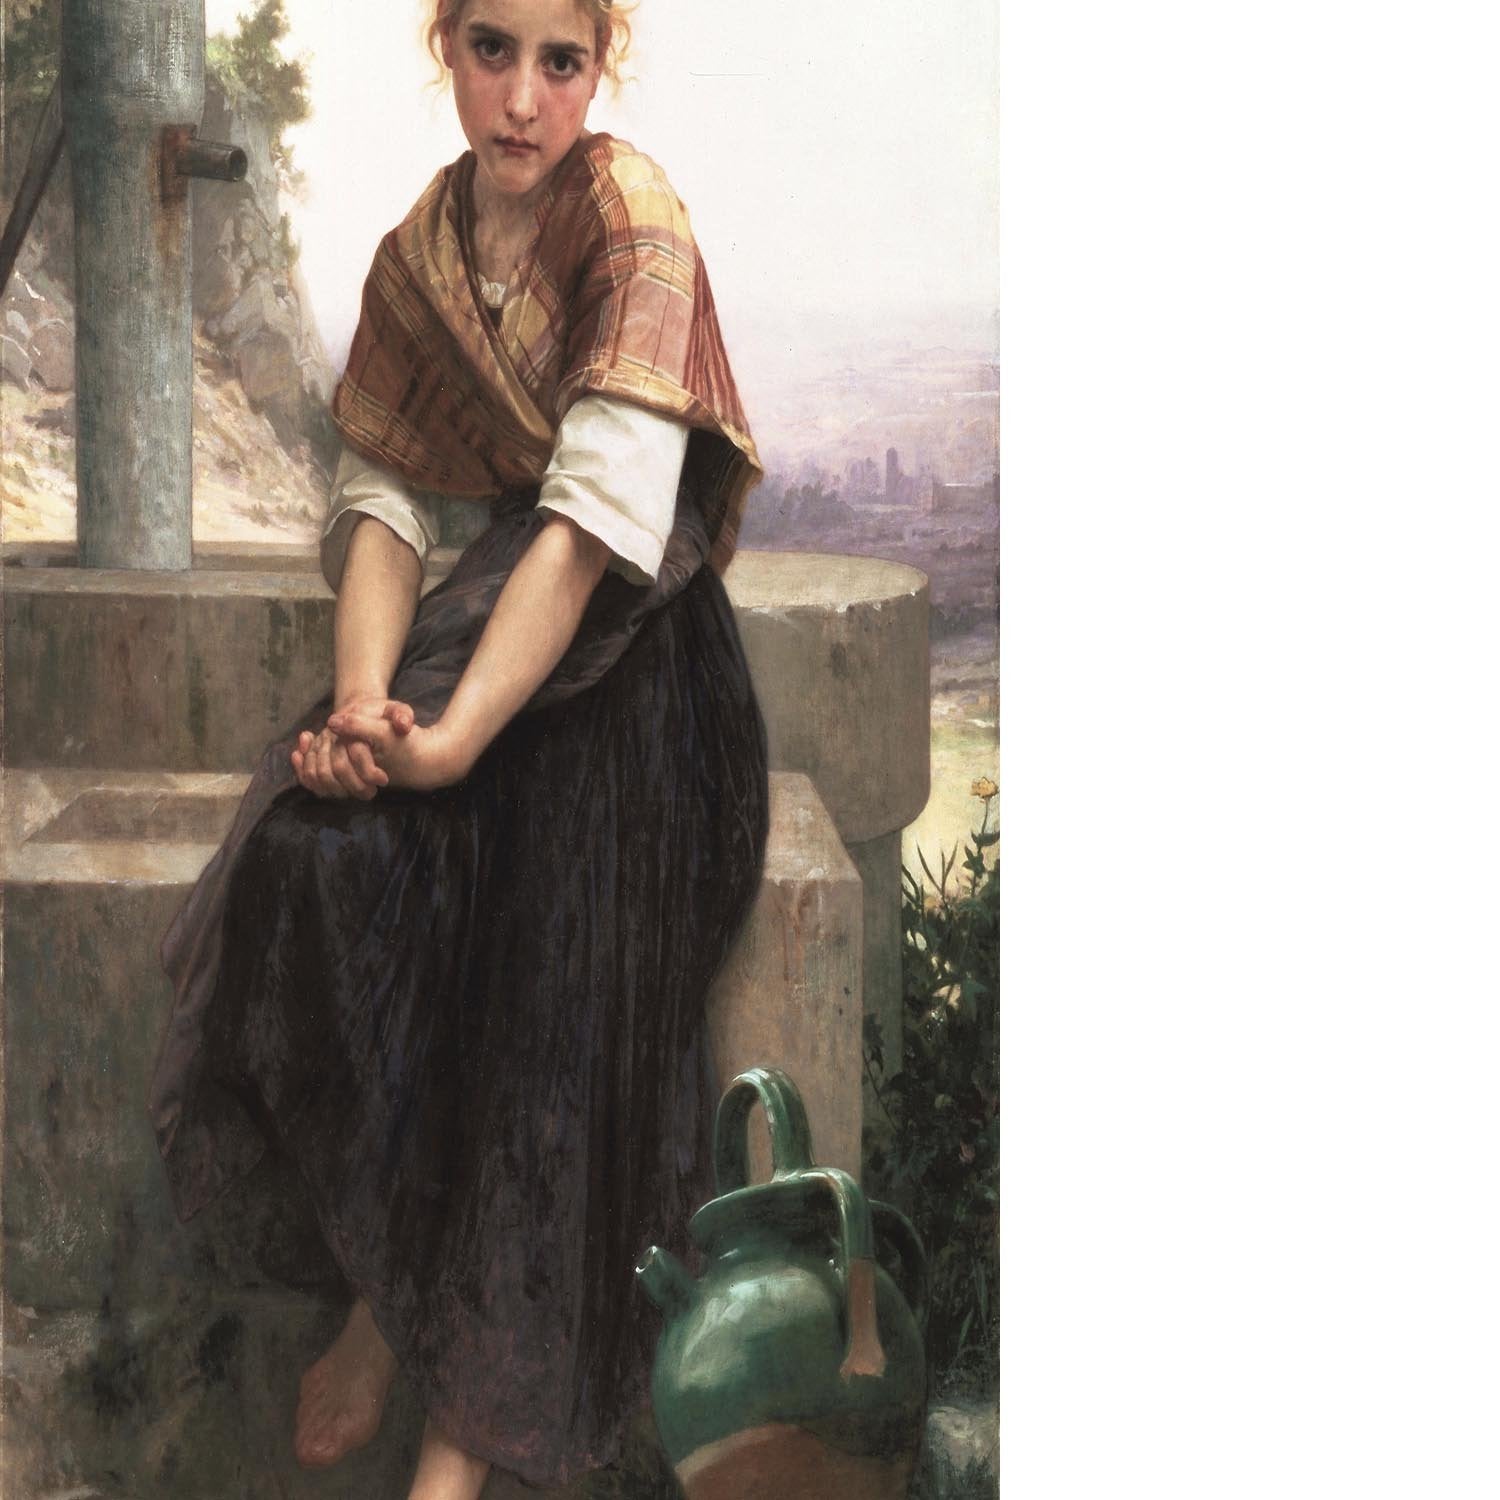 The Broken Pitcher By Bouguereau Floating Framed Canvas